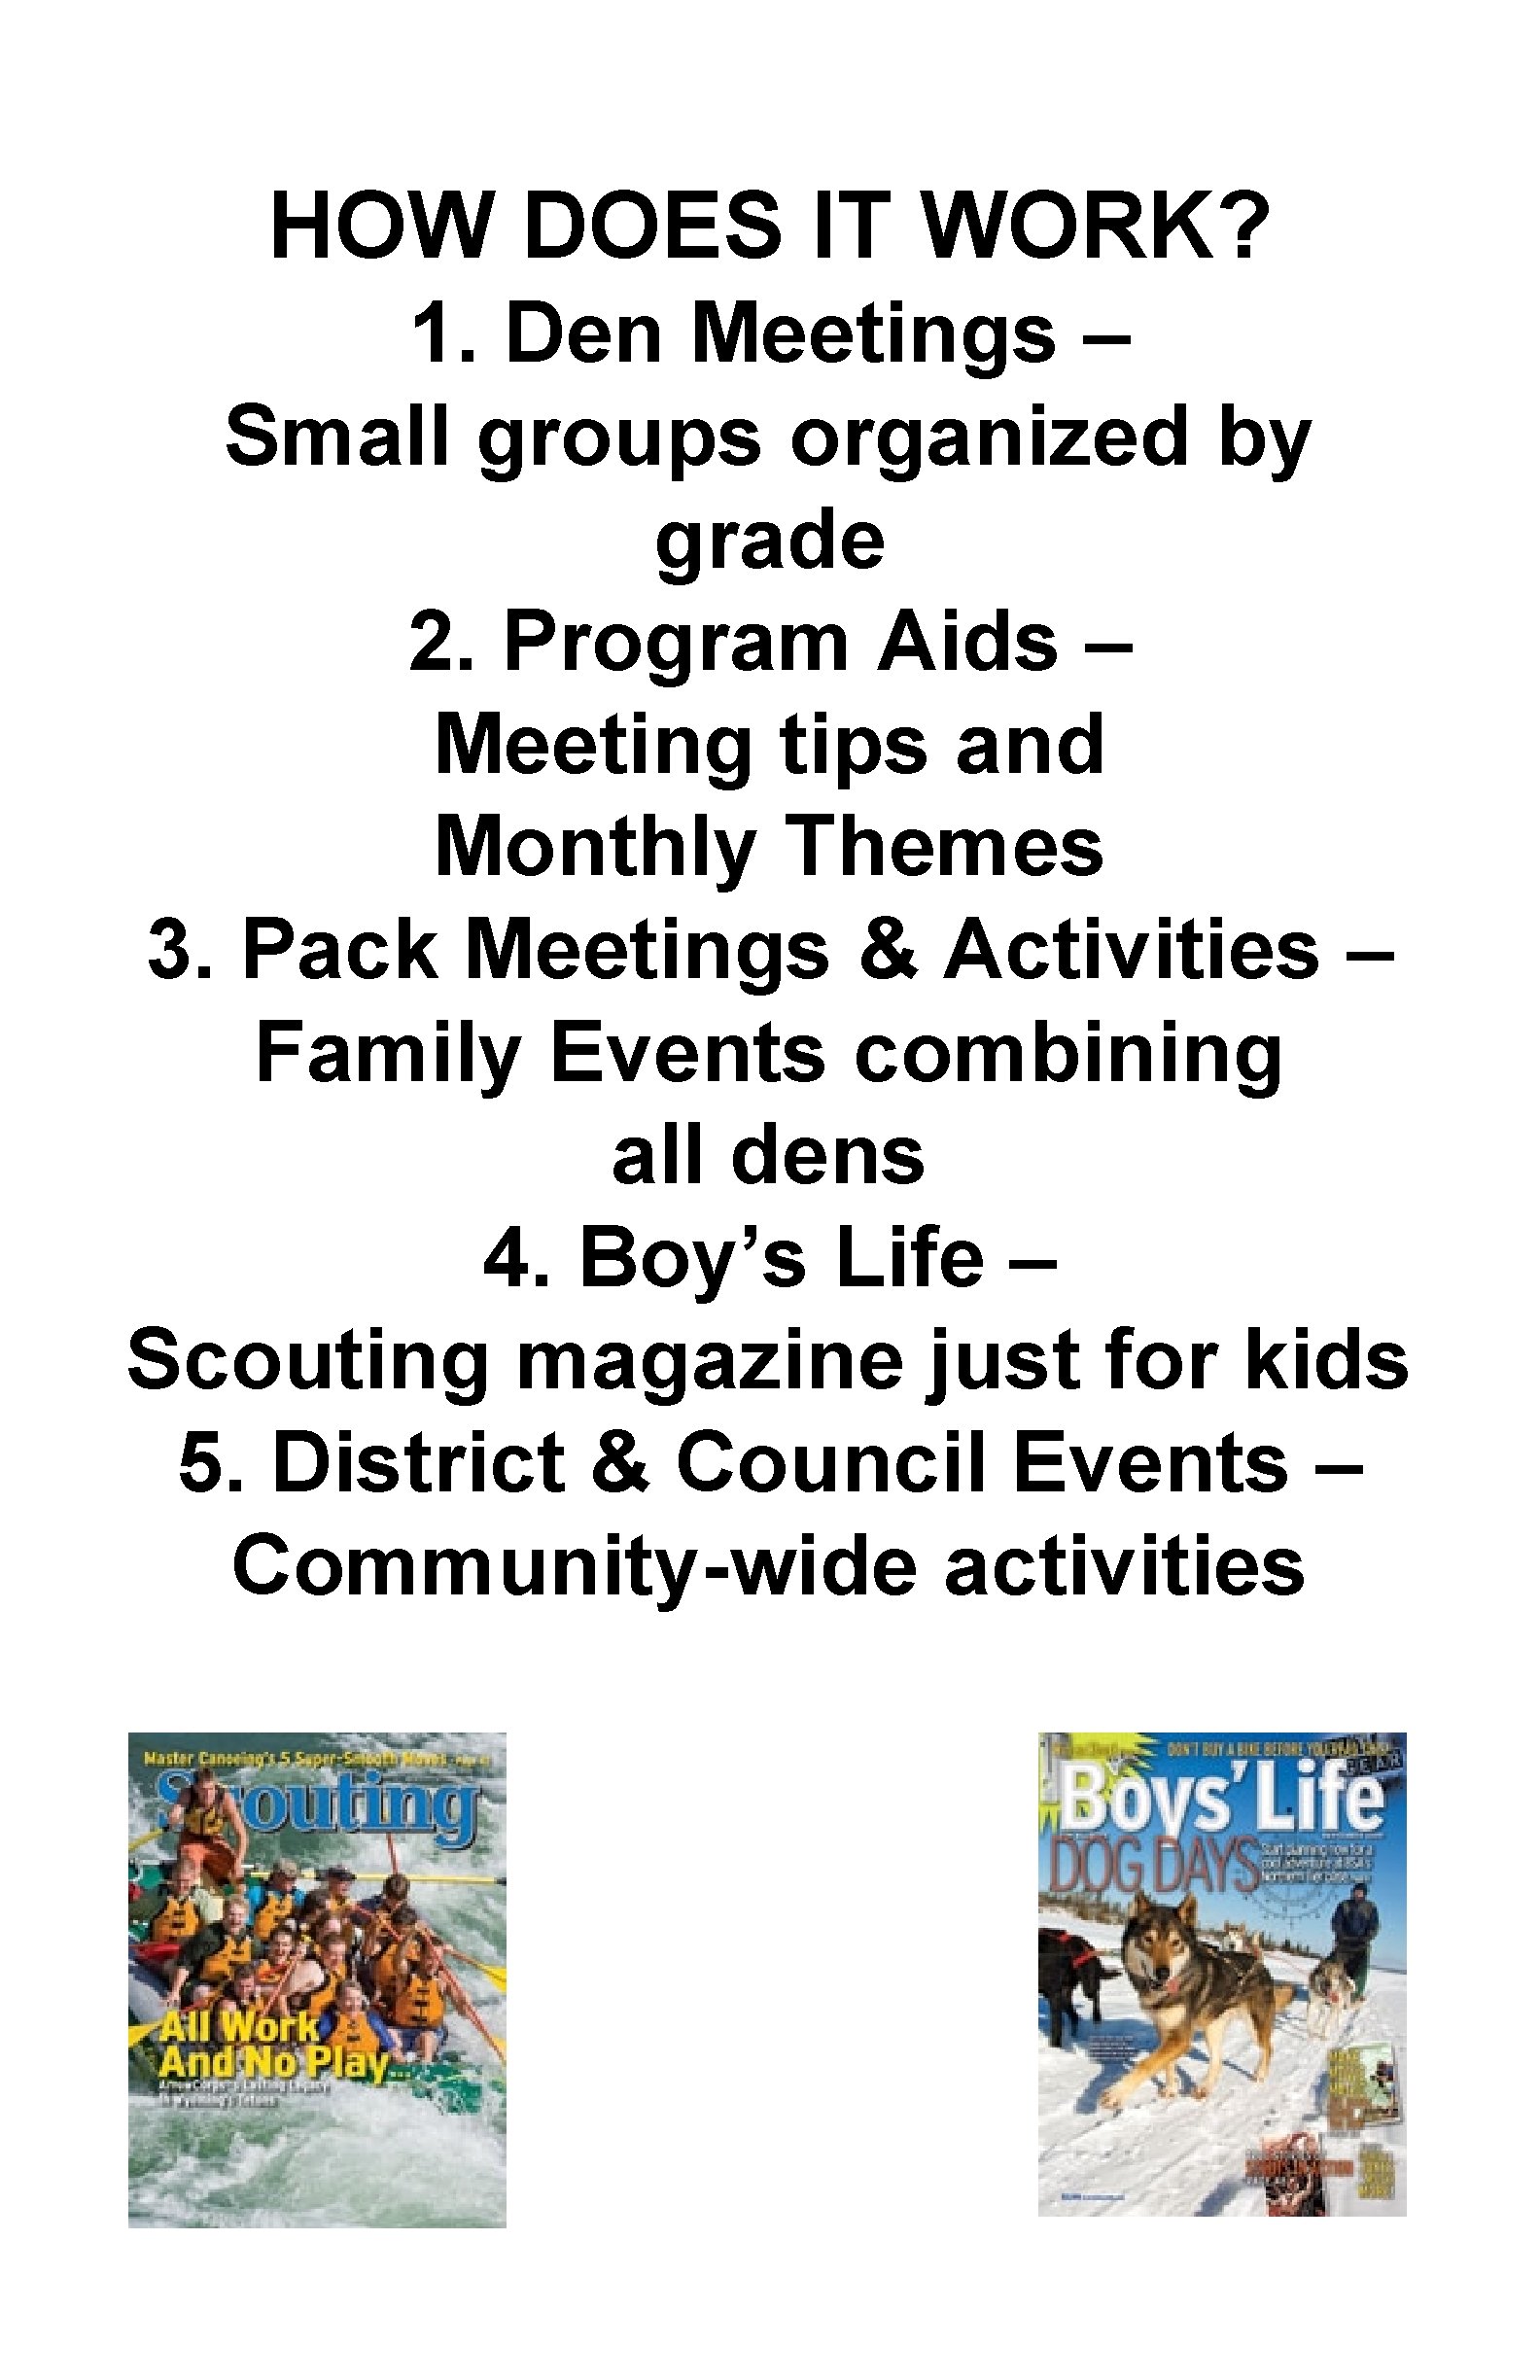 HOW DOES IT WORK? 1. Den Meetings – Small groups organized by grade 2.